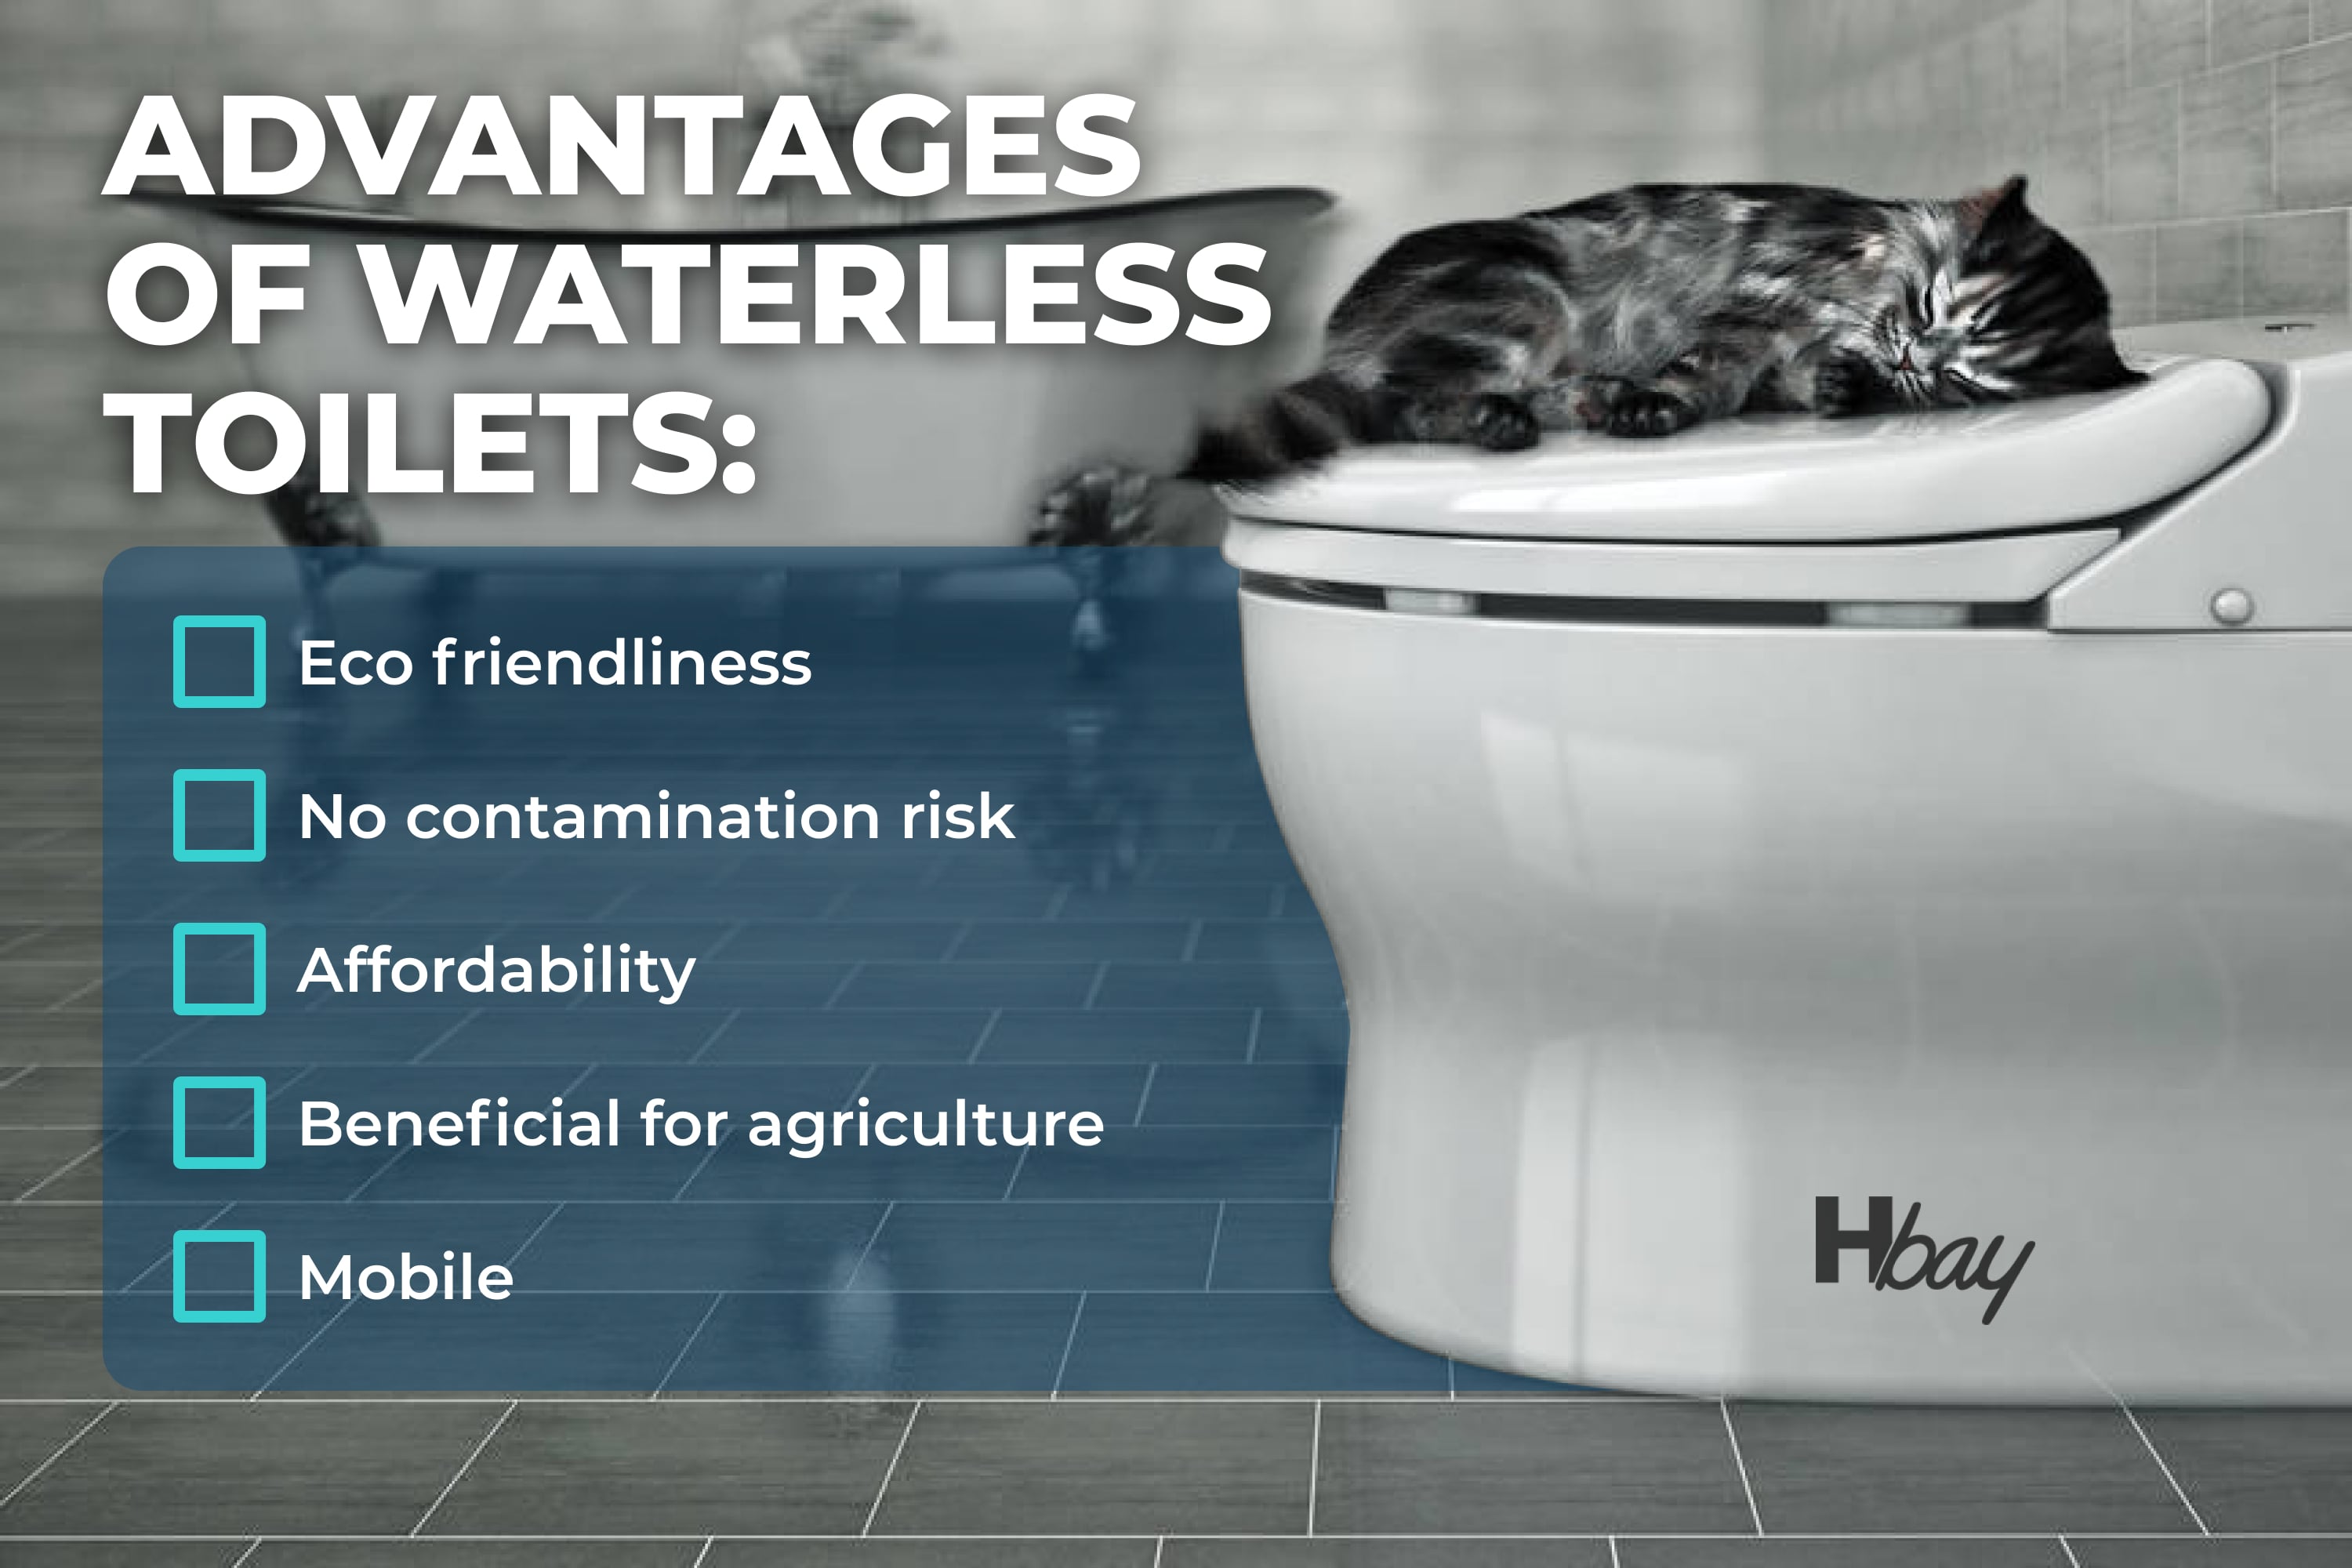 Advantages of waterless toilets